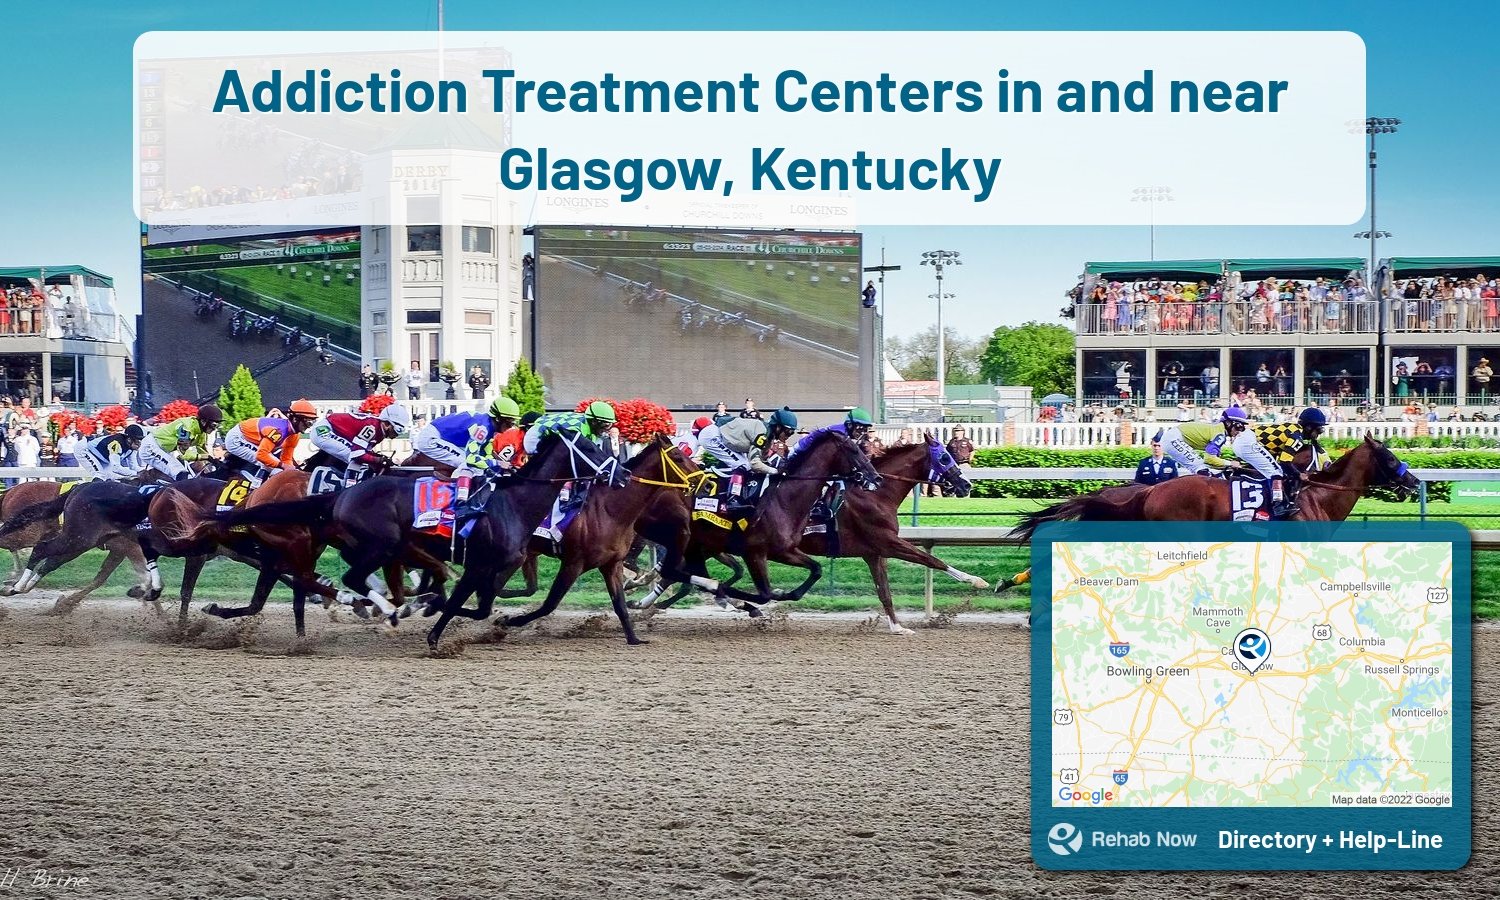 Glasgow, KY Treatment Centers. Find drug rehab in Glasgow, Kentucky, or detox and treatment programs. Get the right help now!